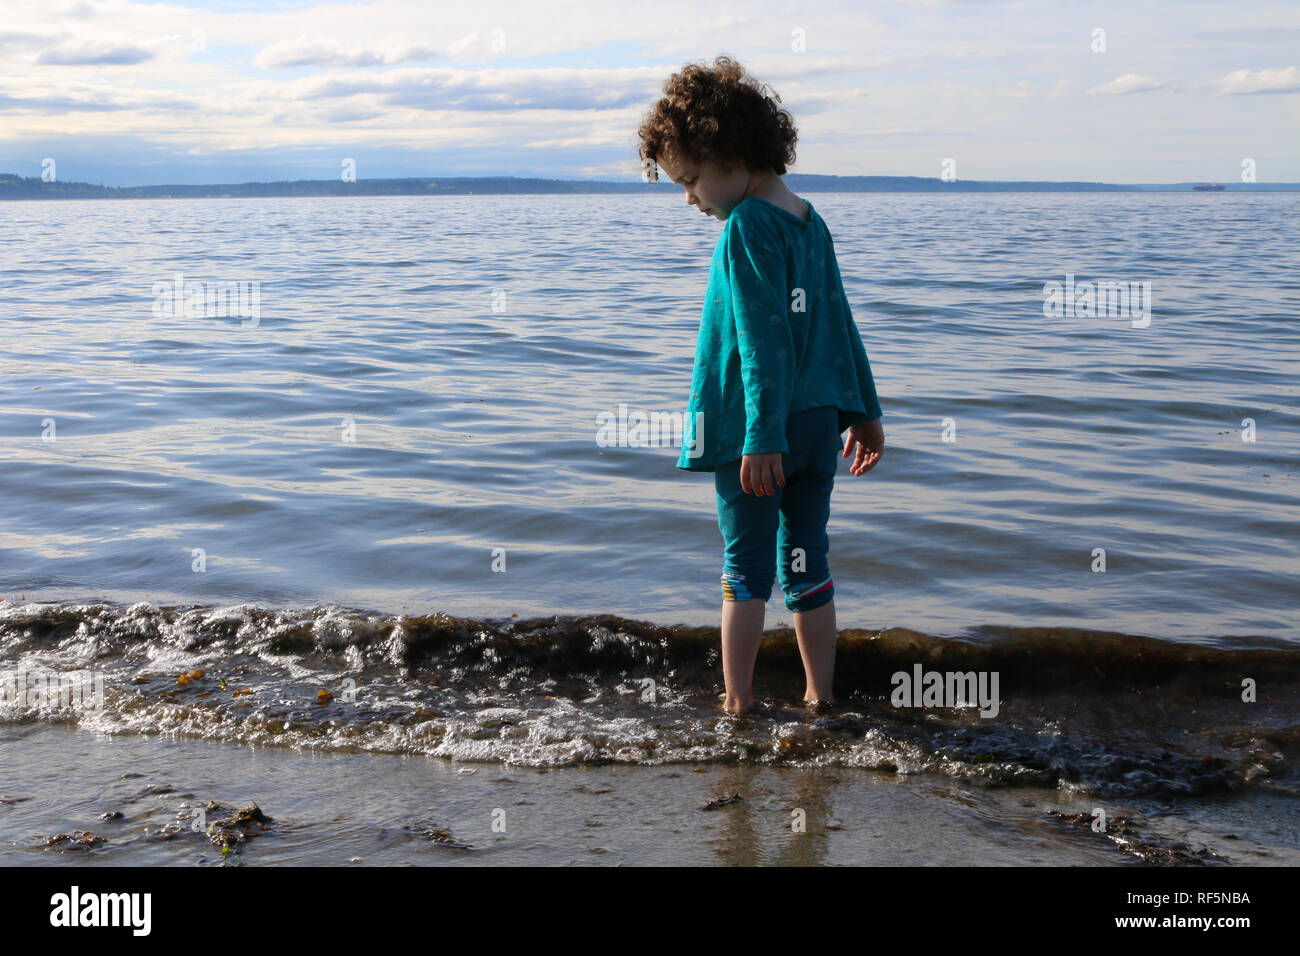 Child wading in the water at the shore of Alki Beach in West Seattle, Washington Stock Photo